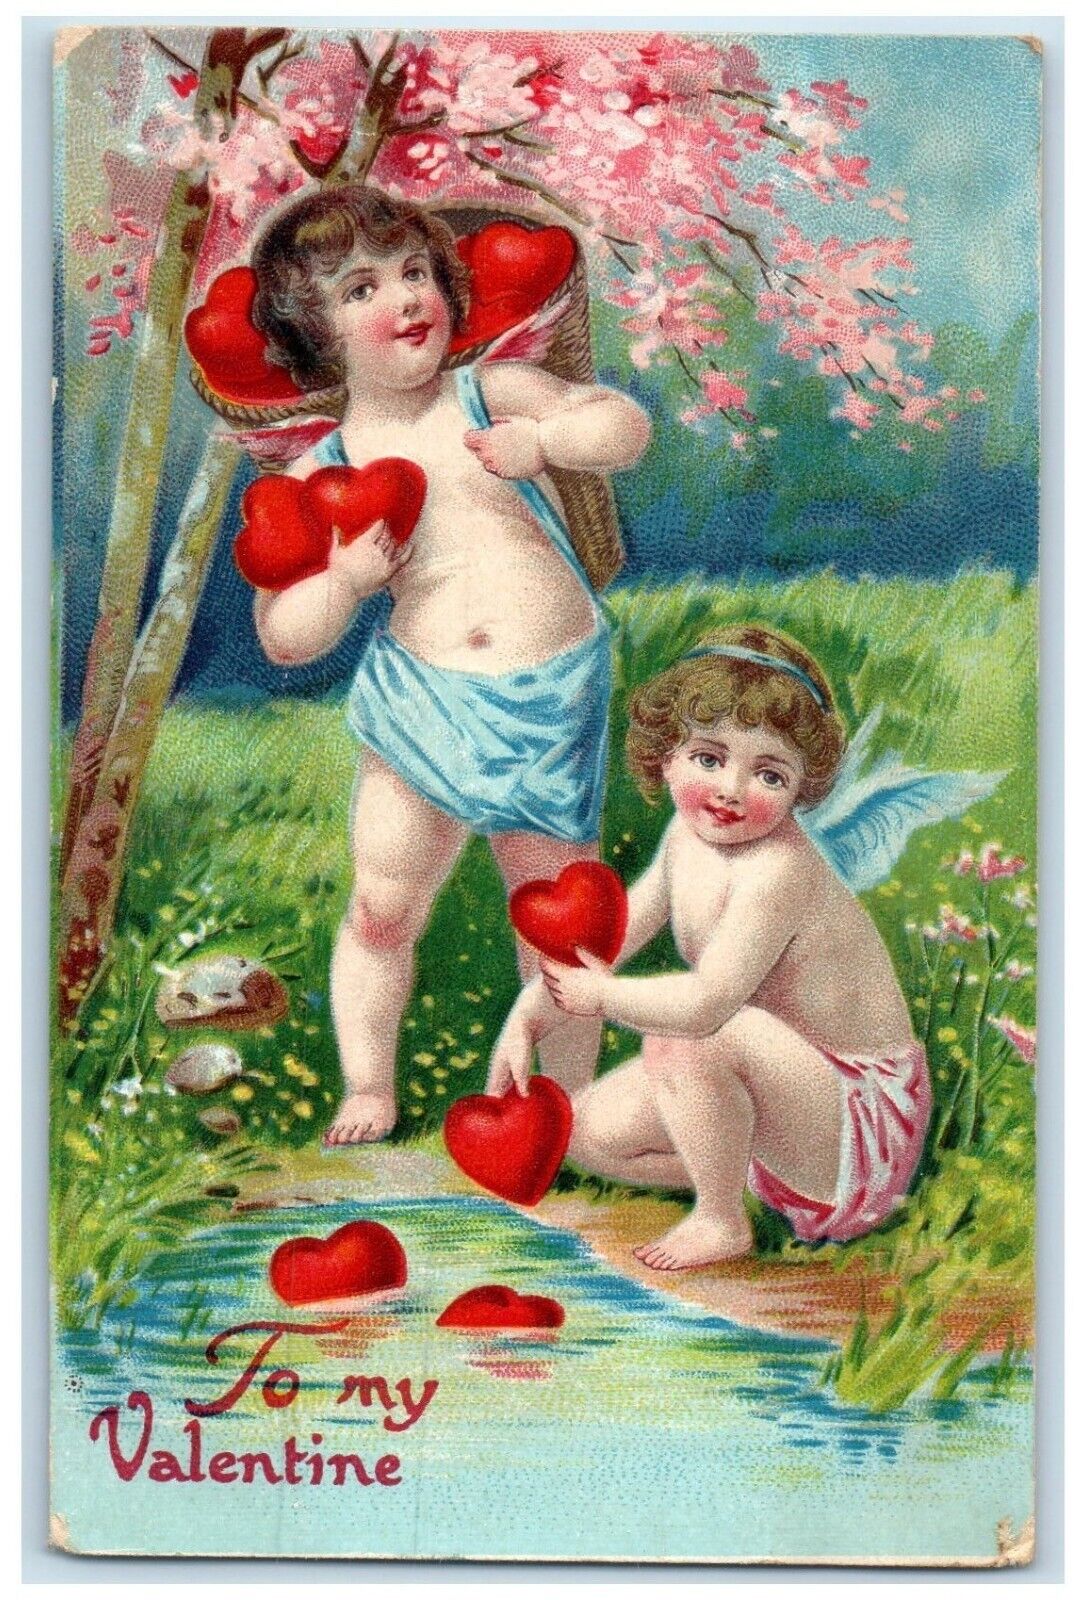 c1910's Valentine Angels Collecting Hearts Blossom Tree Rockville IN Postcard